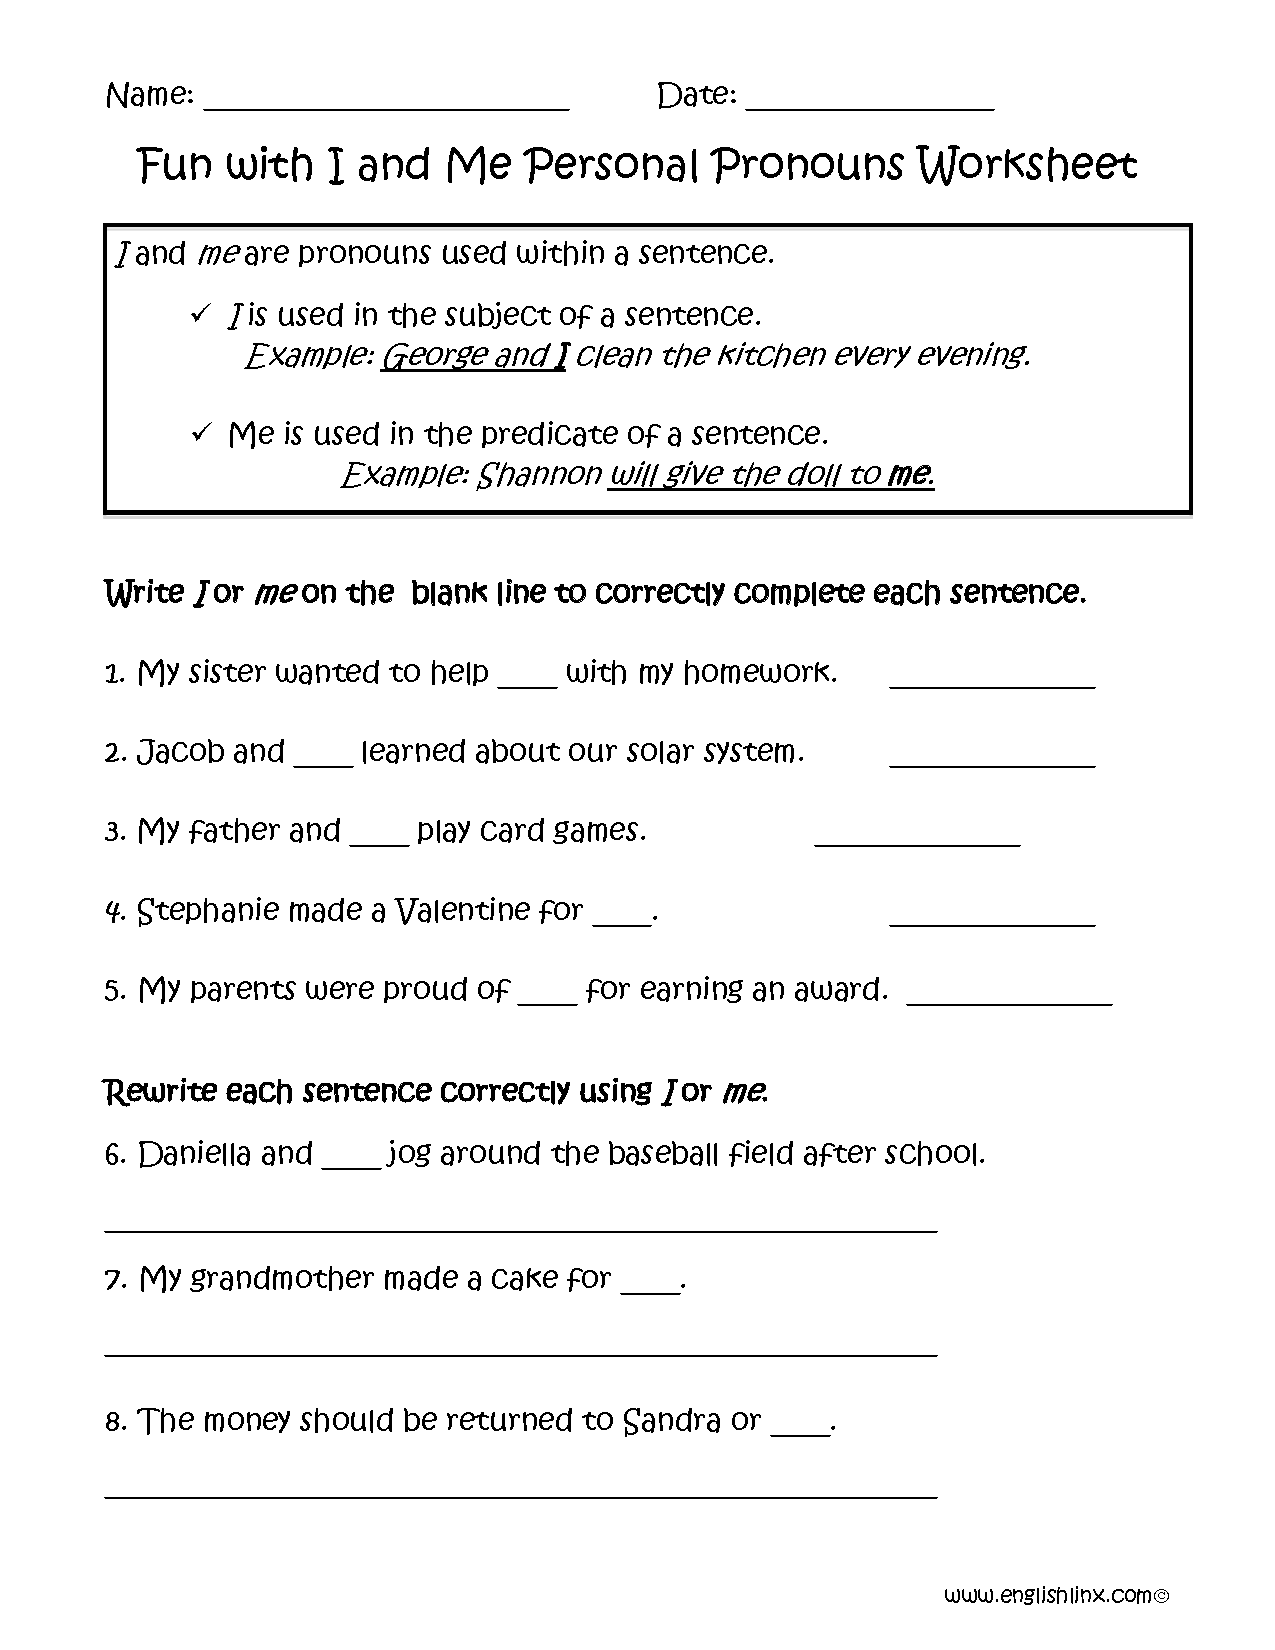 Fun with I or Me Personal Pronouns Worksheets